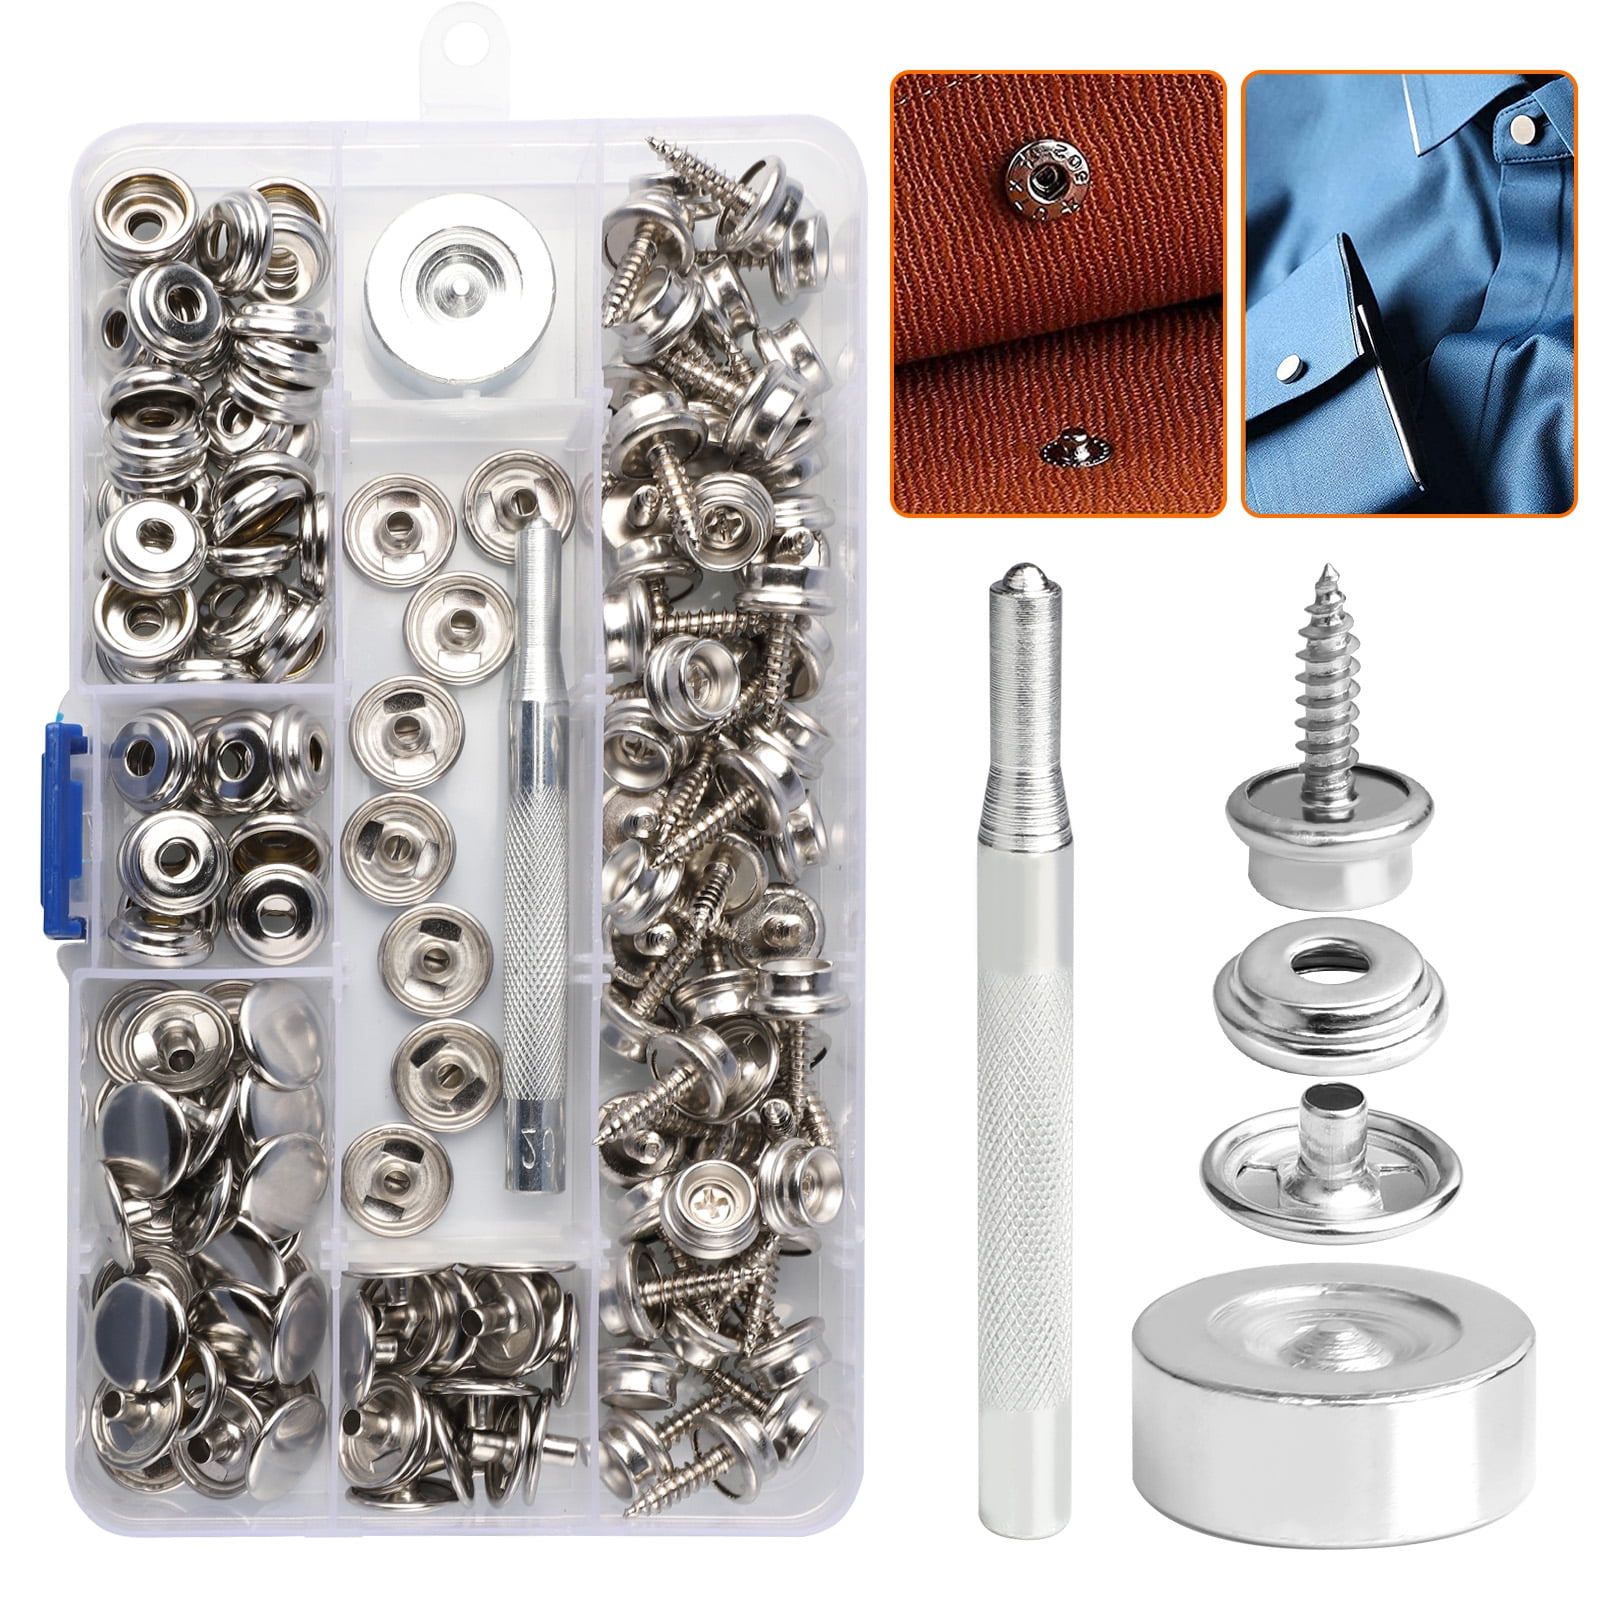 135 PCS Snap Kit Tool Marine Grade Stainless Steel Button Fastener Tool  Replacement Snap with 2Pcs Setting Tools for Boat Cover Furniture  (0.39”0.39)